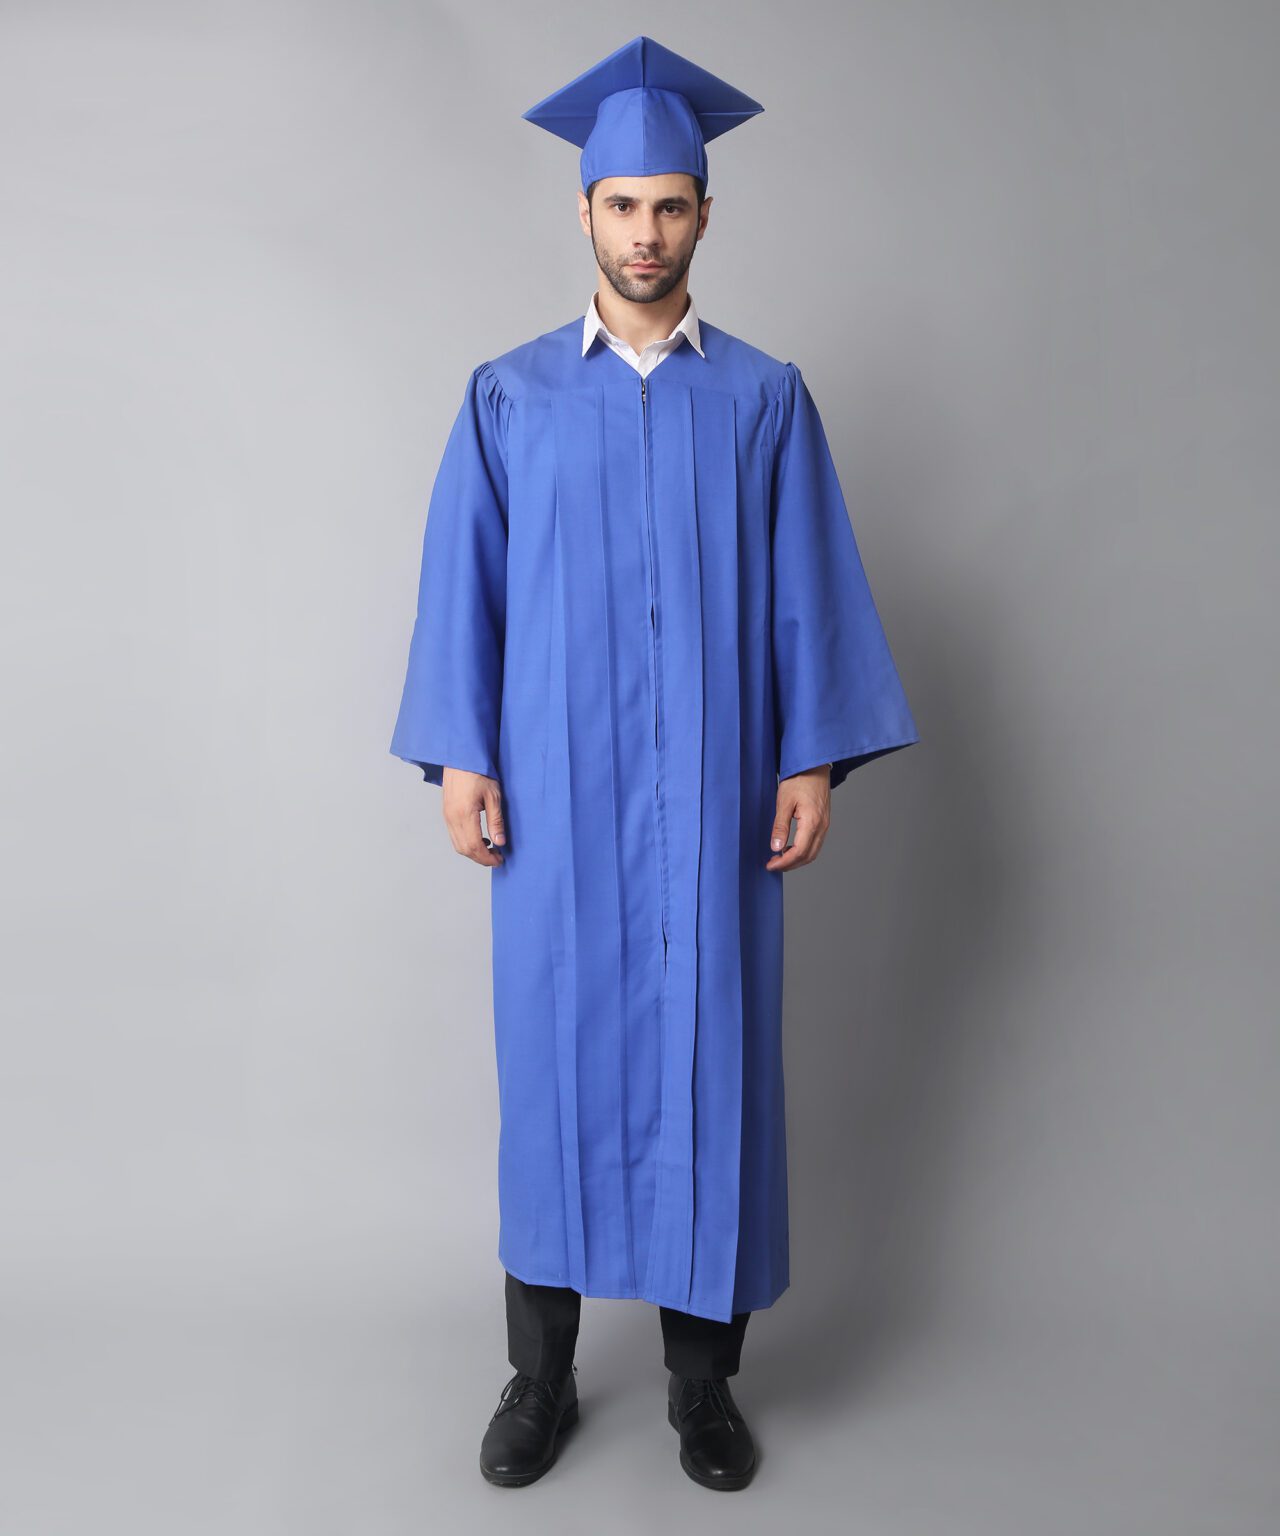 Handsome Guy In A Graduation Gown Background, Graduation Picture For Men,  Graduation, Graduation Season Background Image And Wallpaper for Free  Download